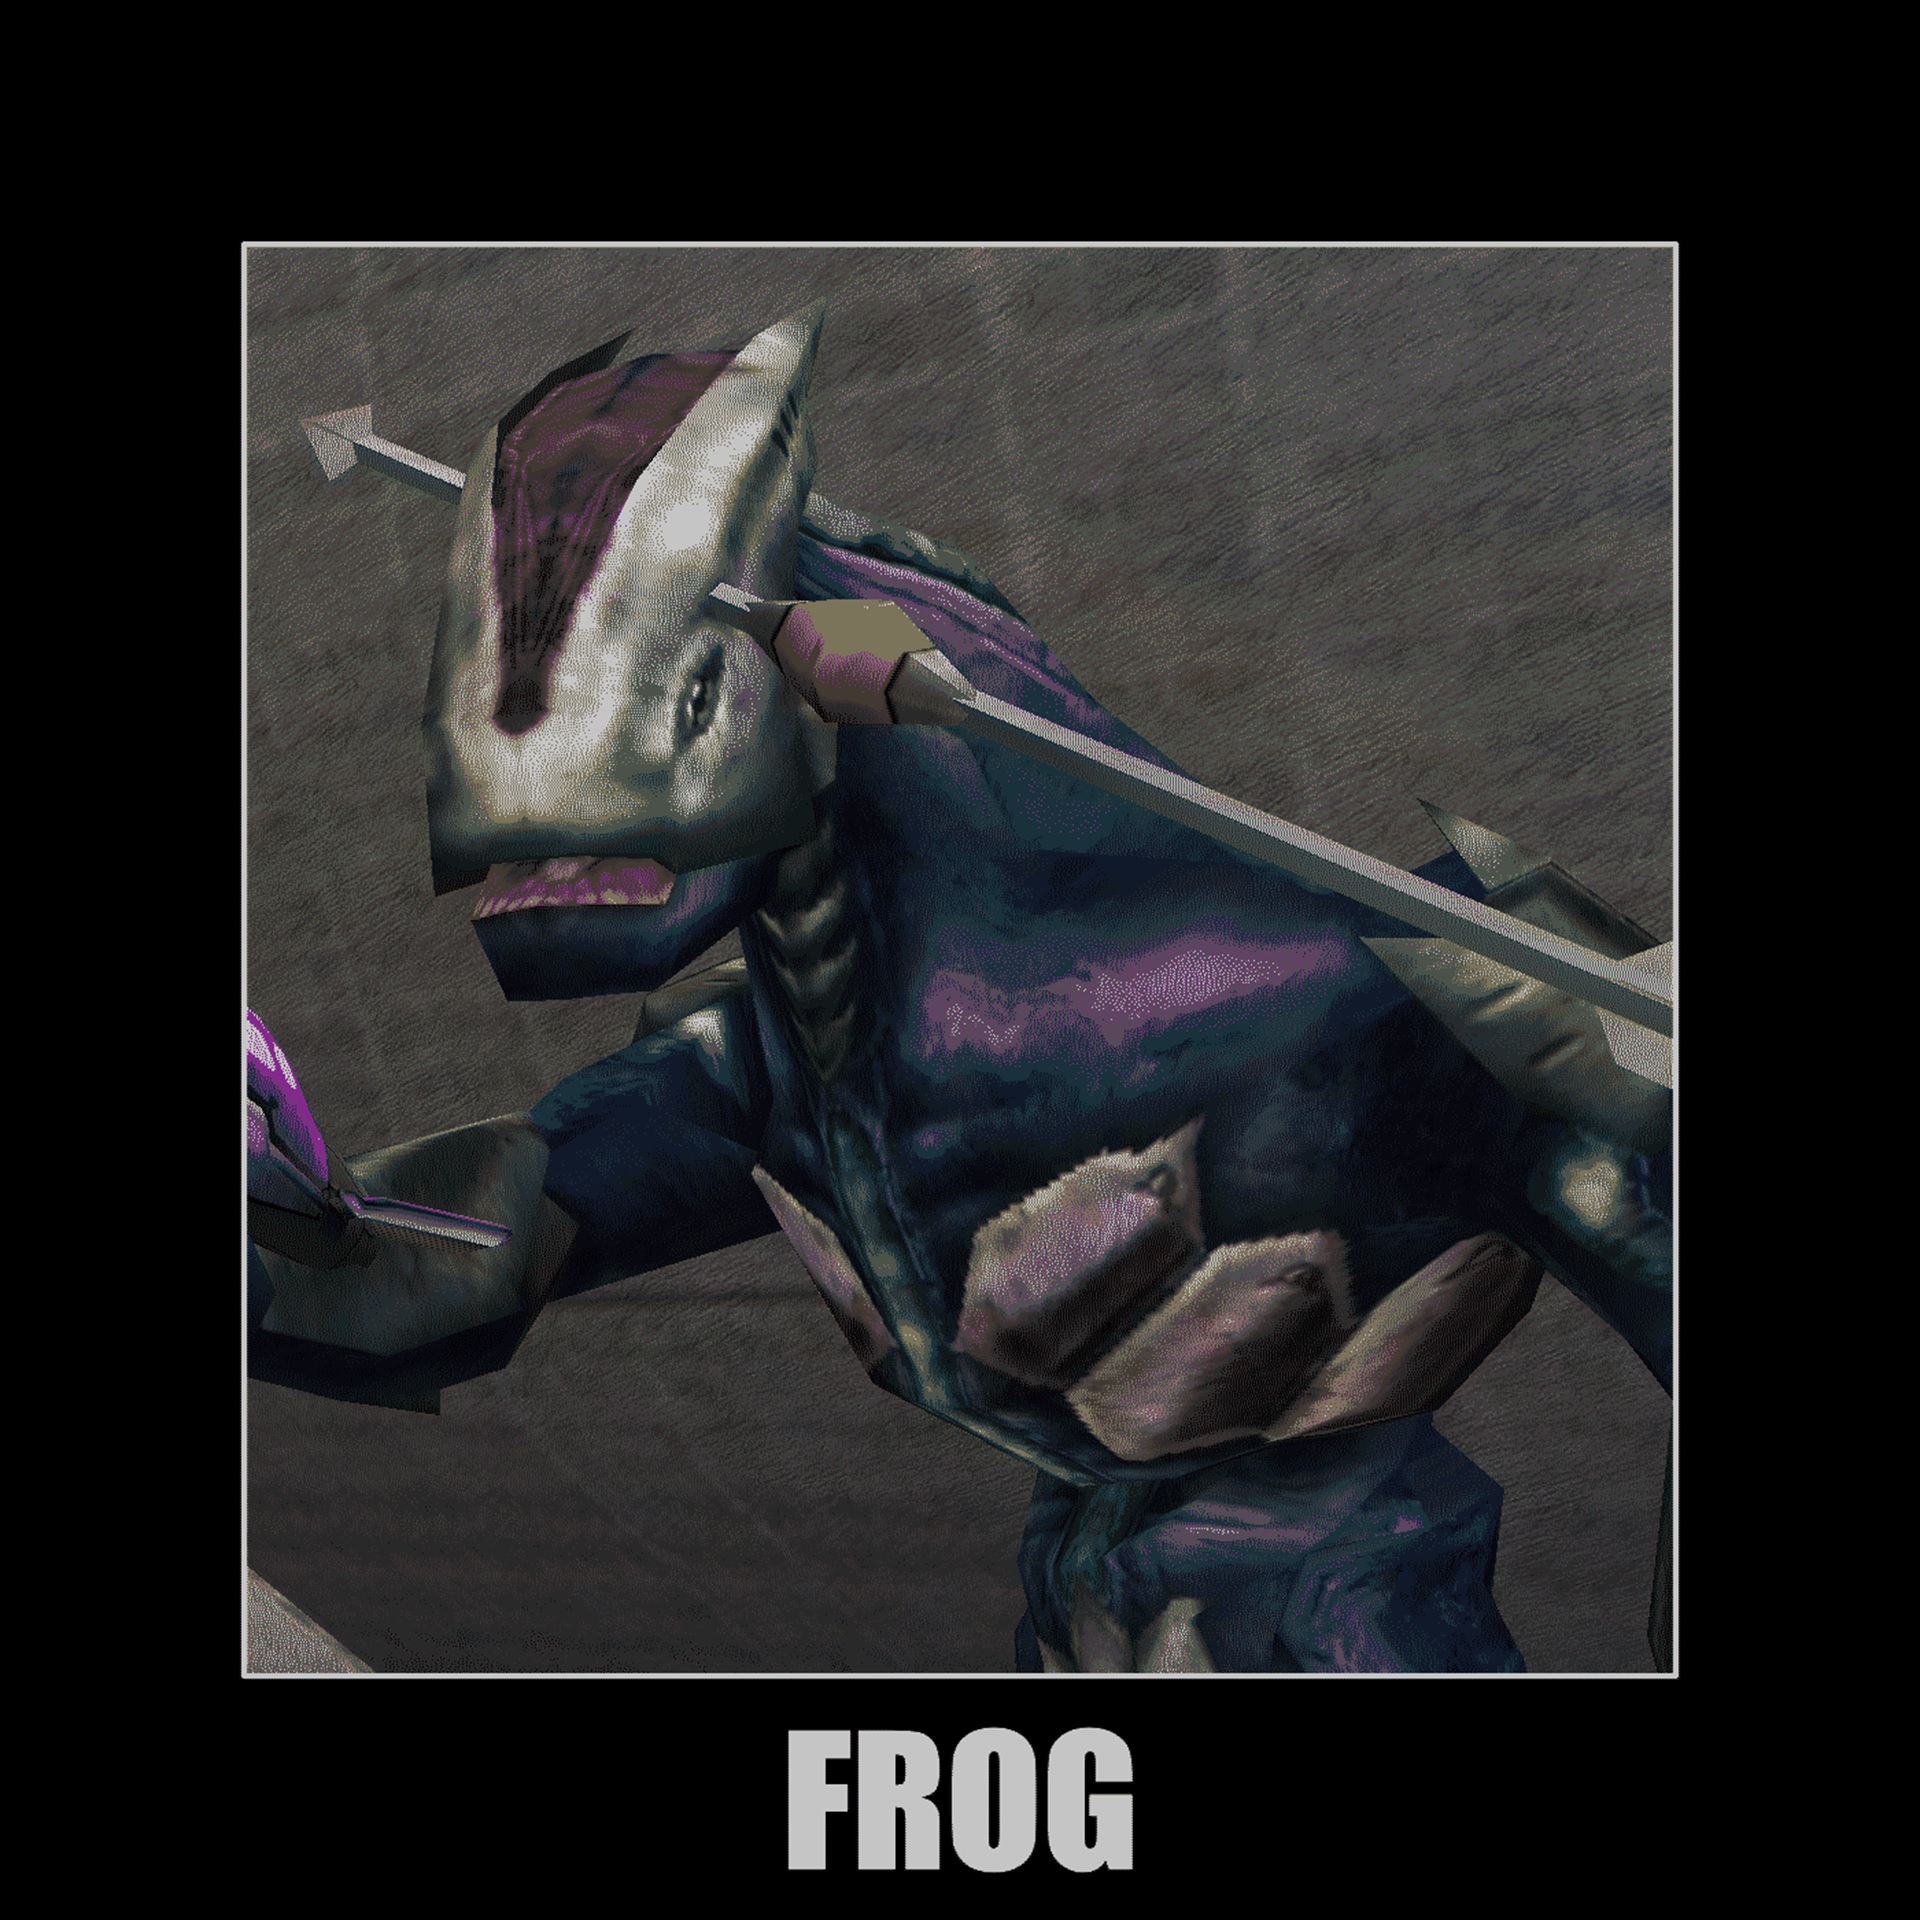 Digsite meme image of an early Elite with a spear in its head titled "FROG"